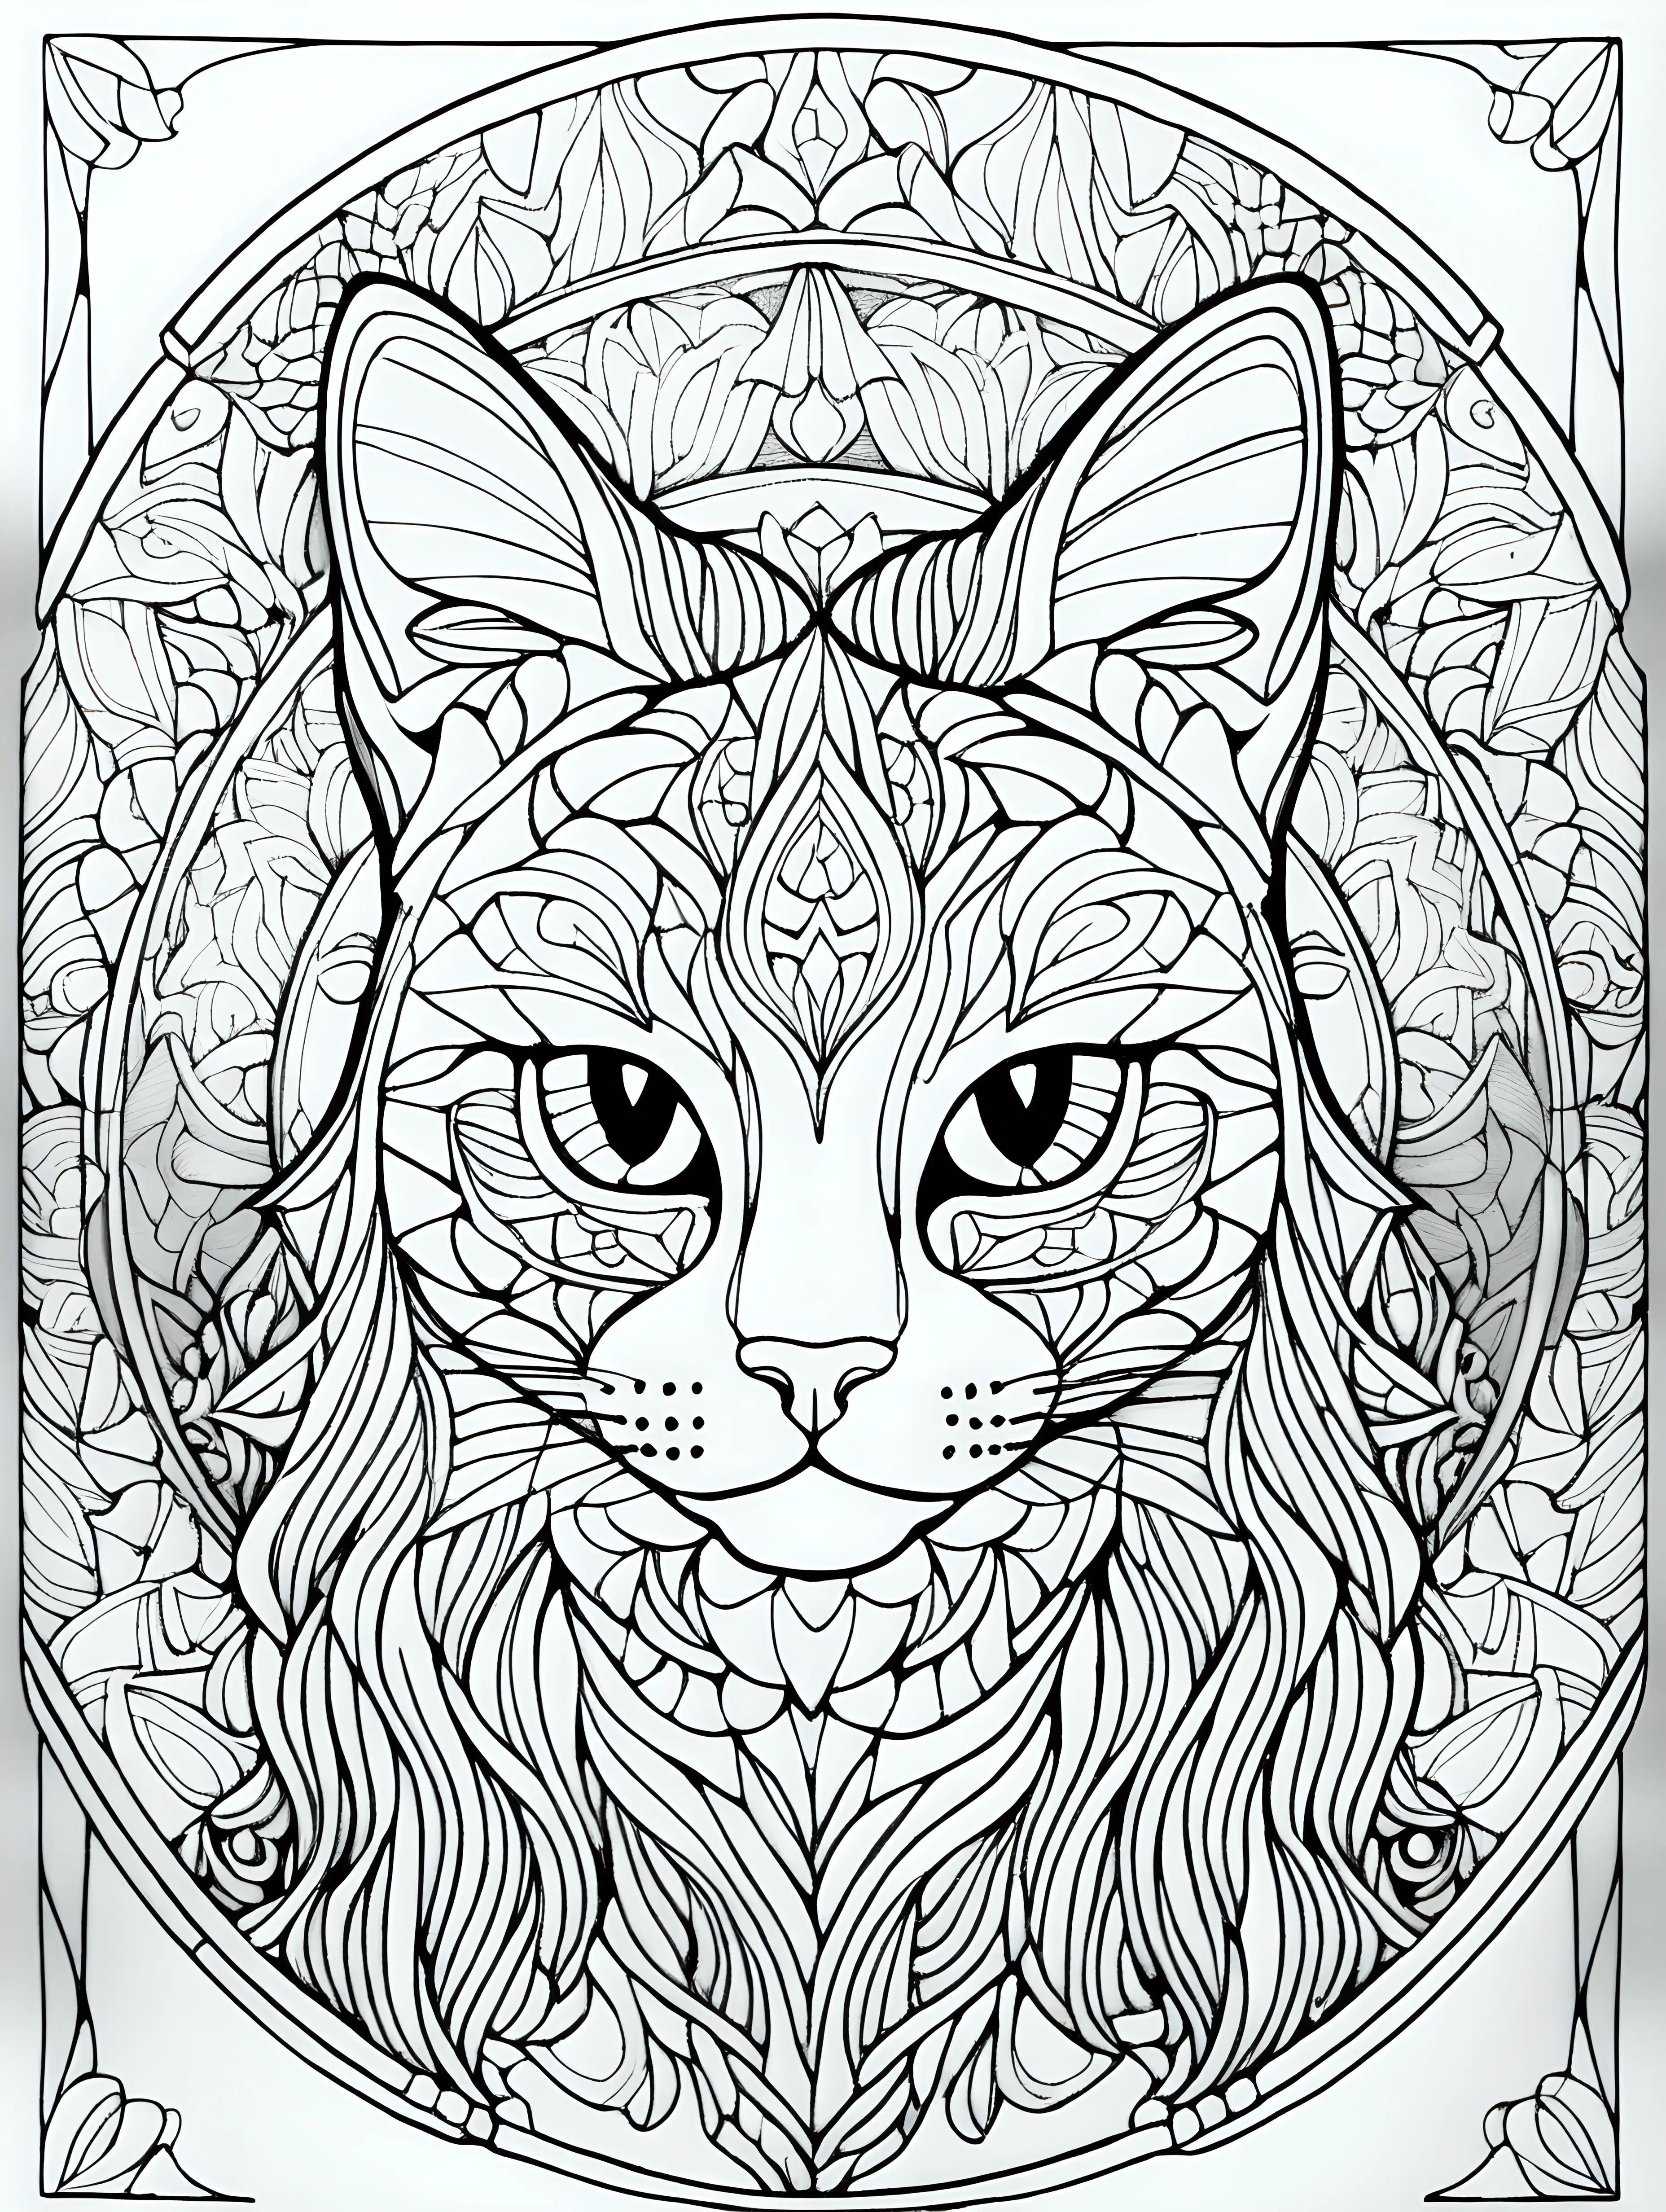 Mirrored Mandala Cat Coloring Book Intricate Feline Designs for Relaxation